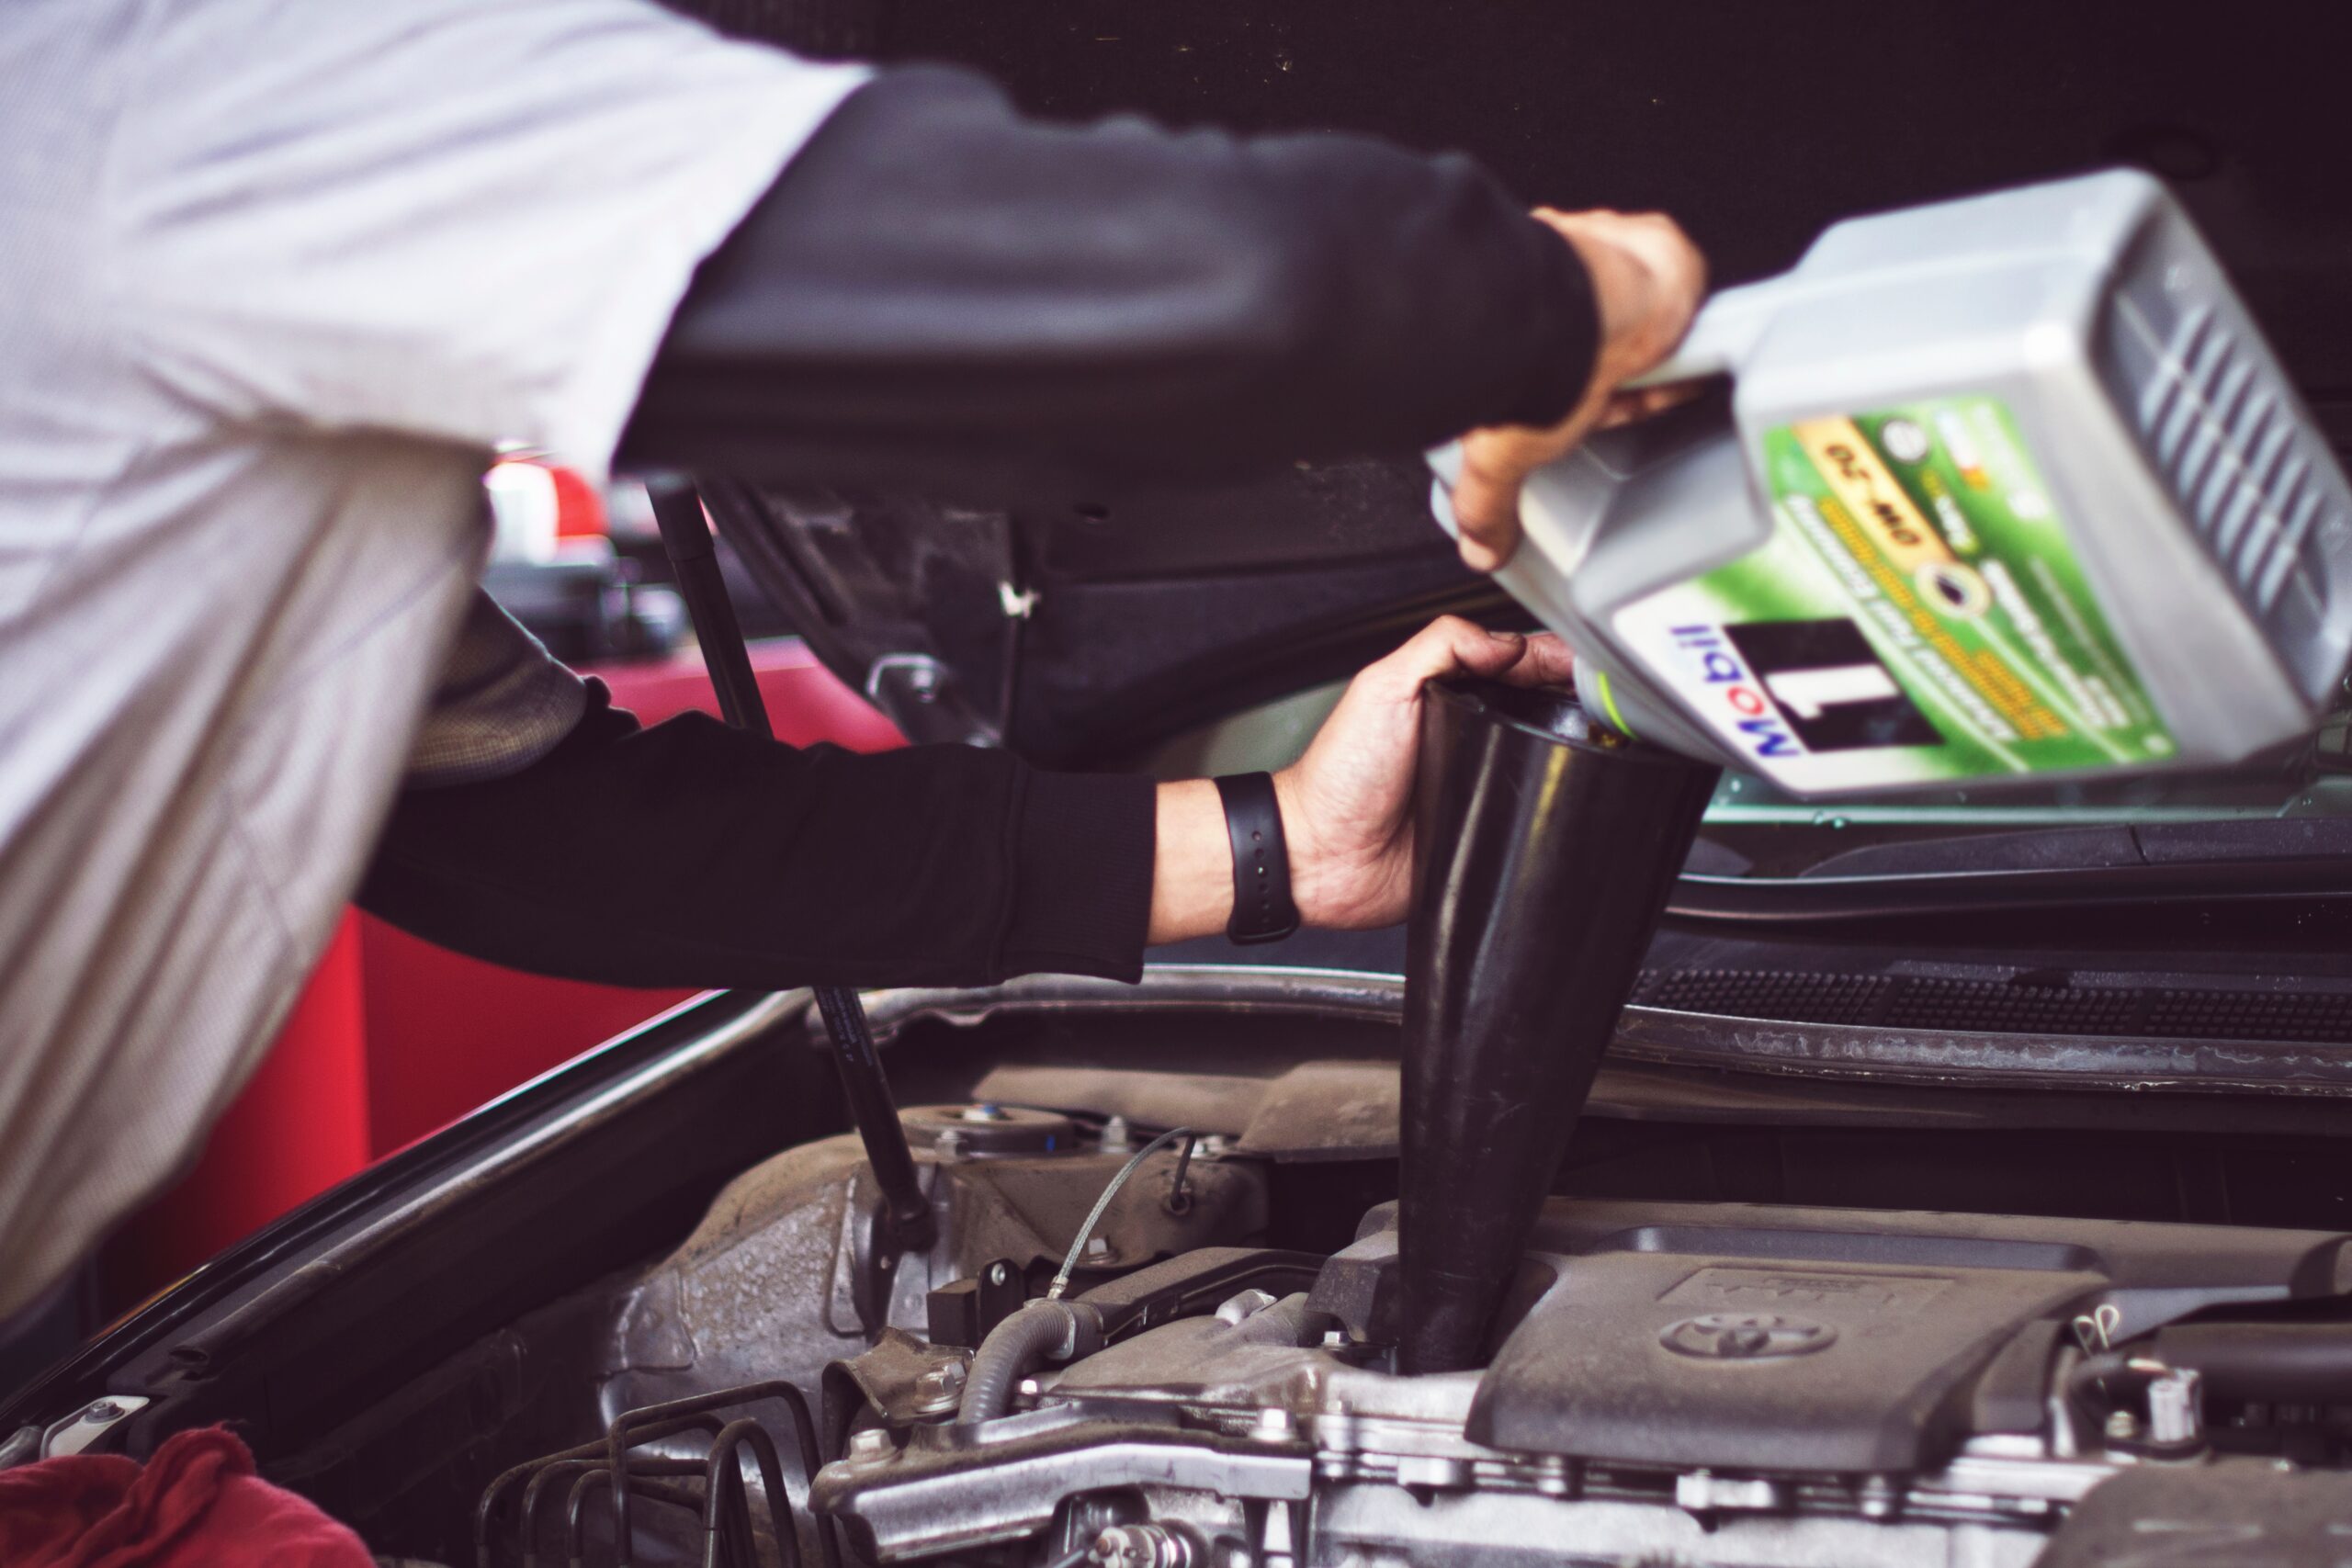 List of Auto Parts to Check to Ensure Your Car Is in Top Condition